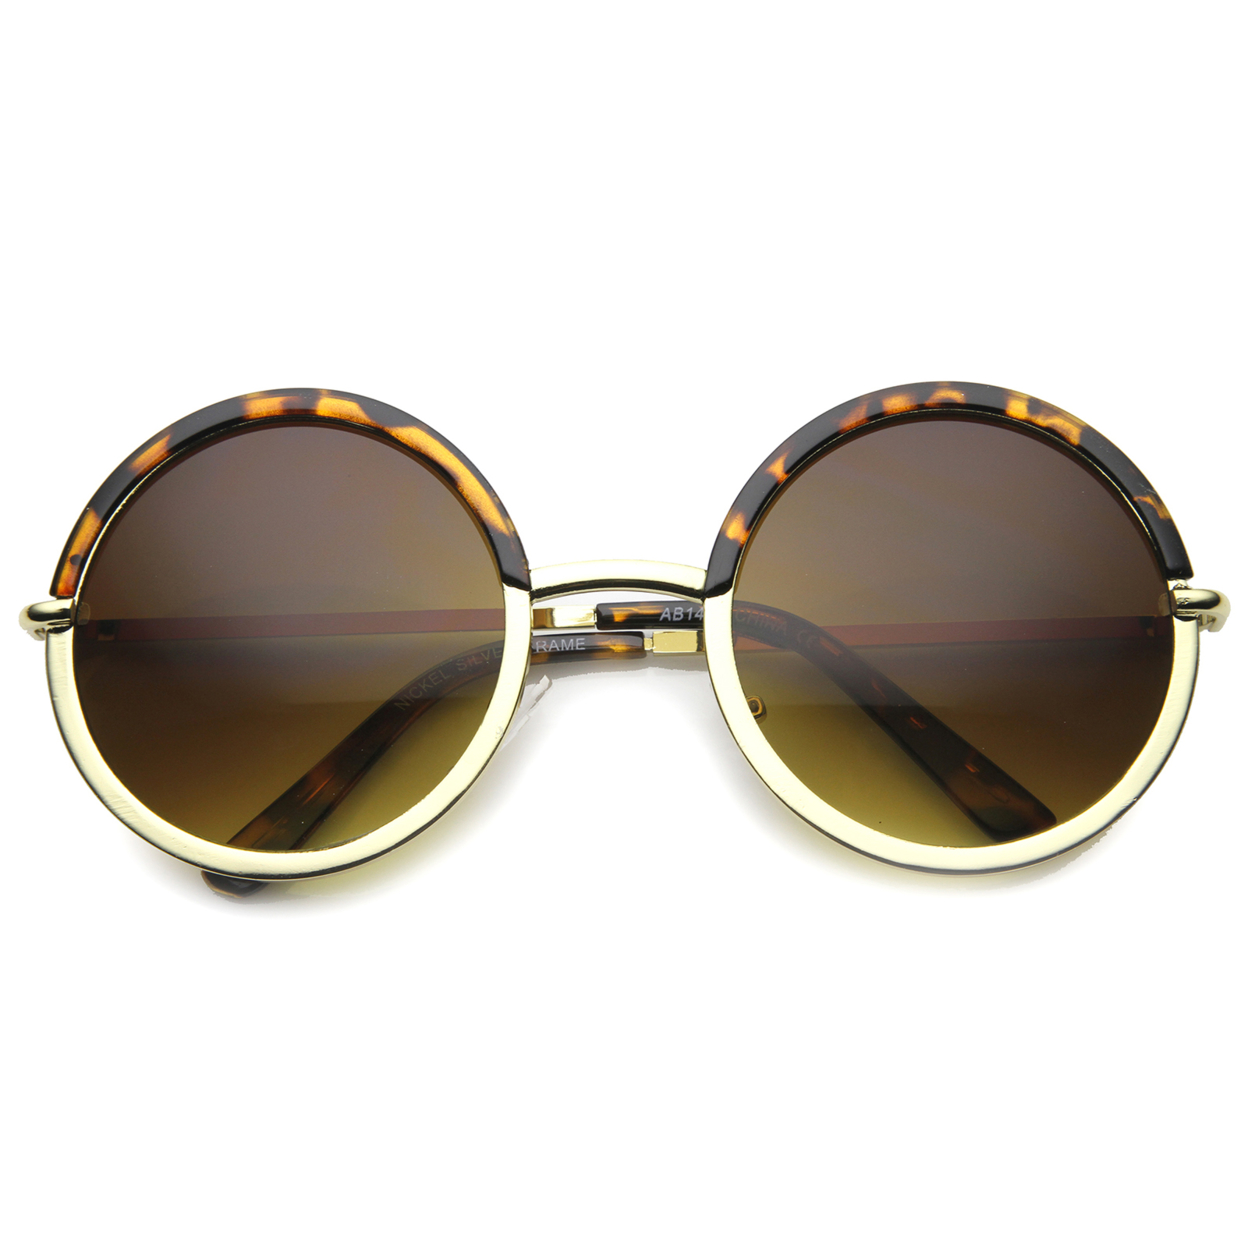 Unisex Metal Round Sunglasses With UV400 Protected Gradient Lens 9895 - Tortoise-Gold / Amber